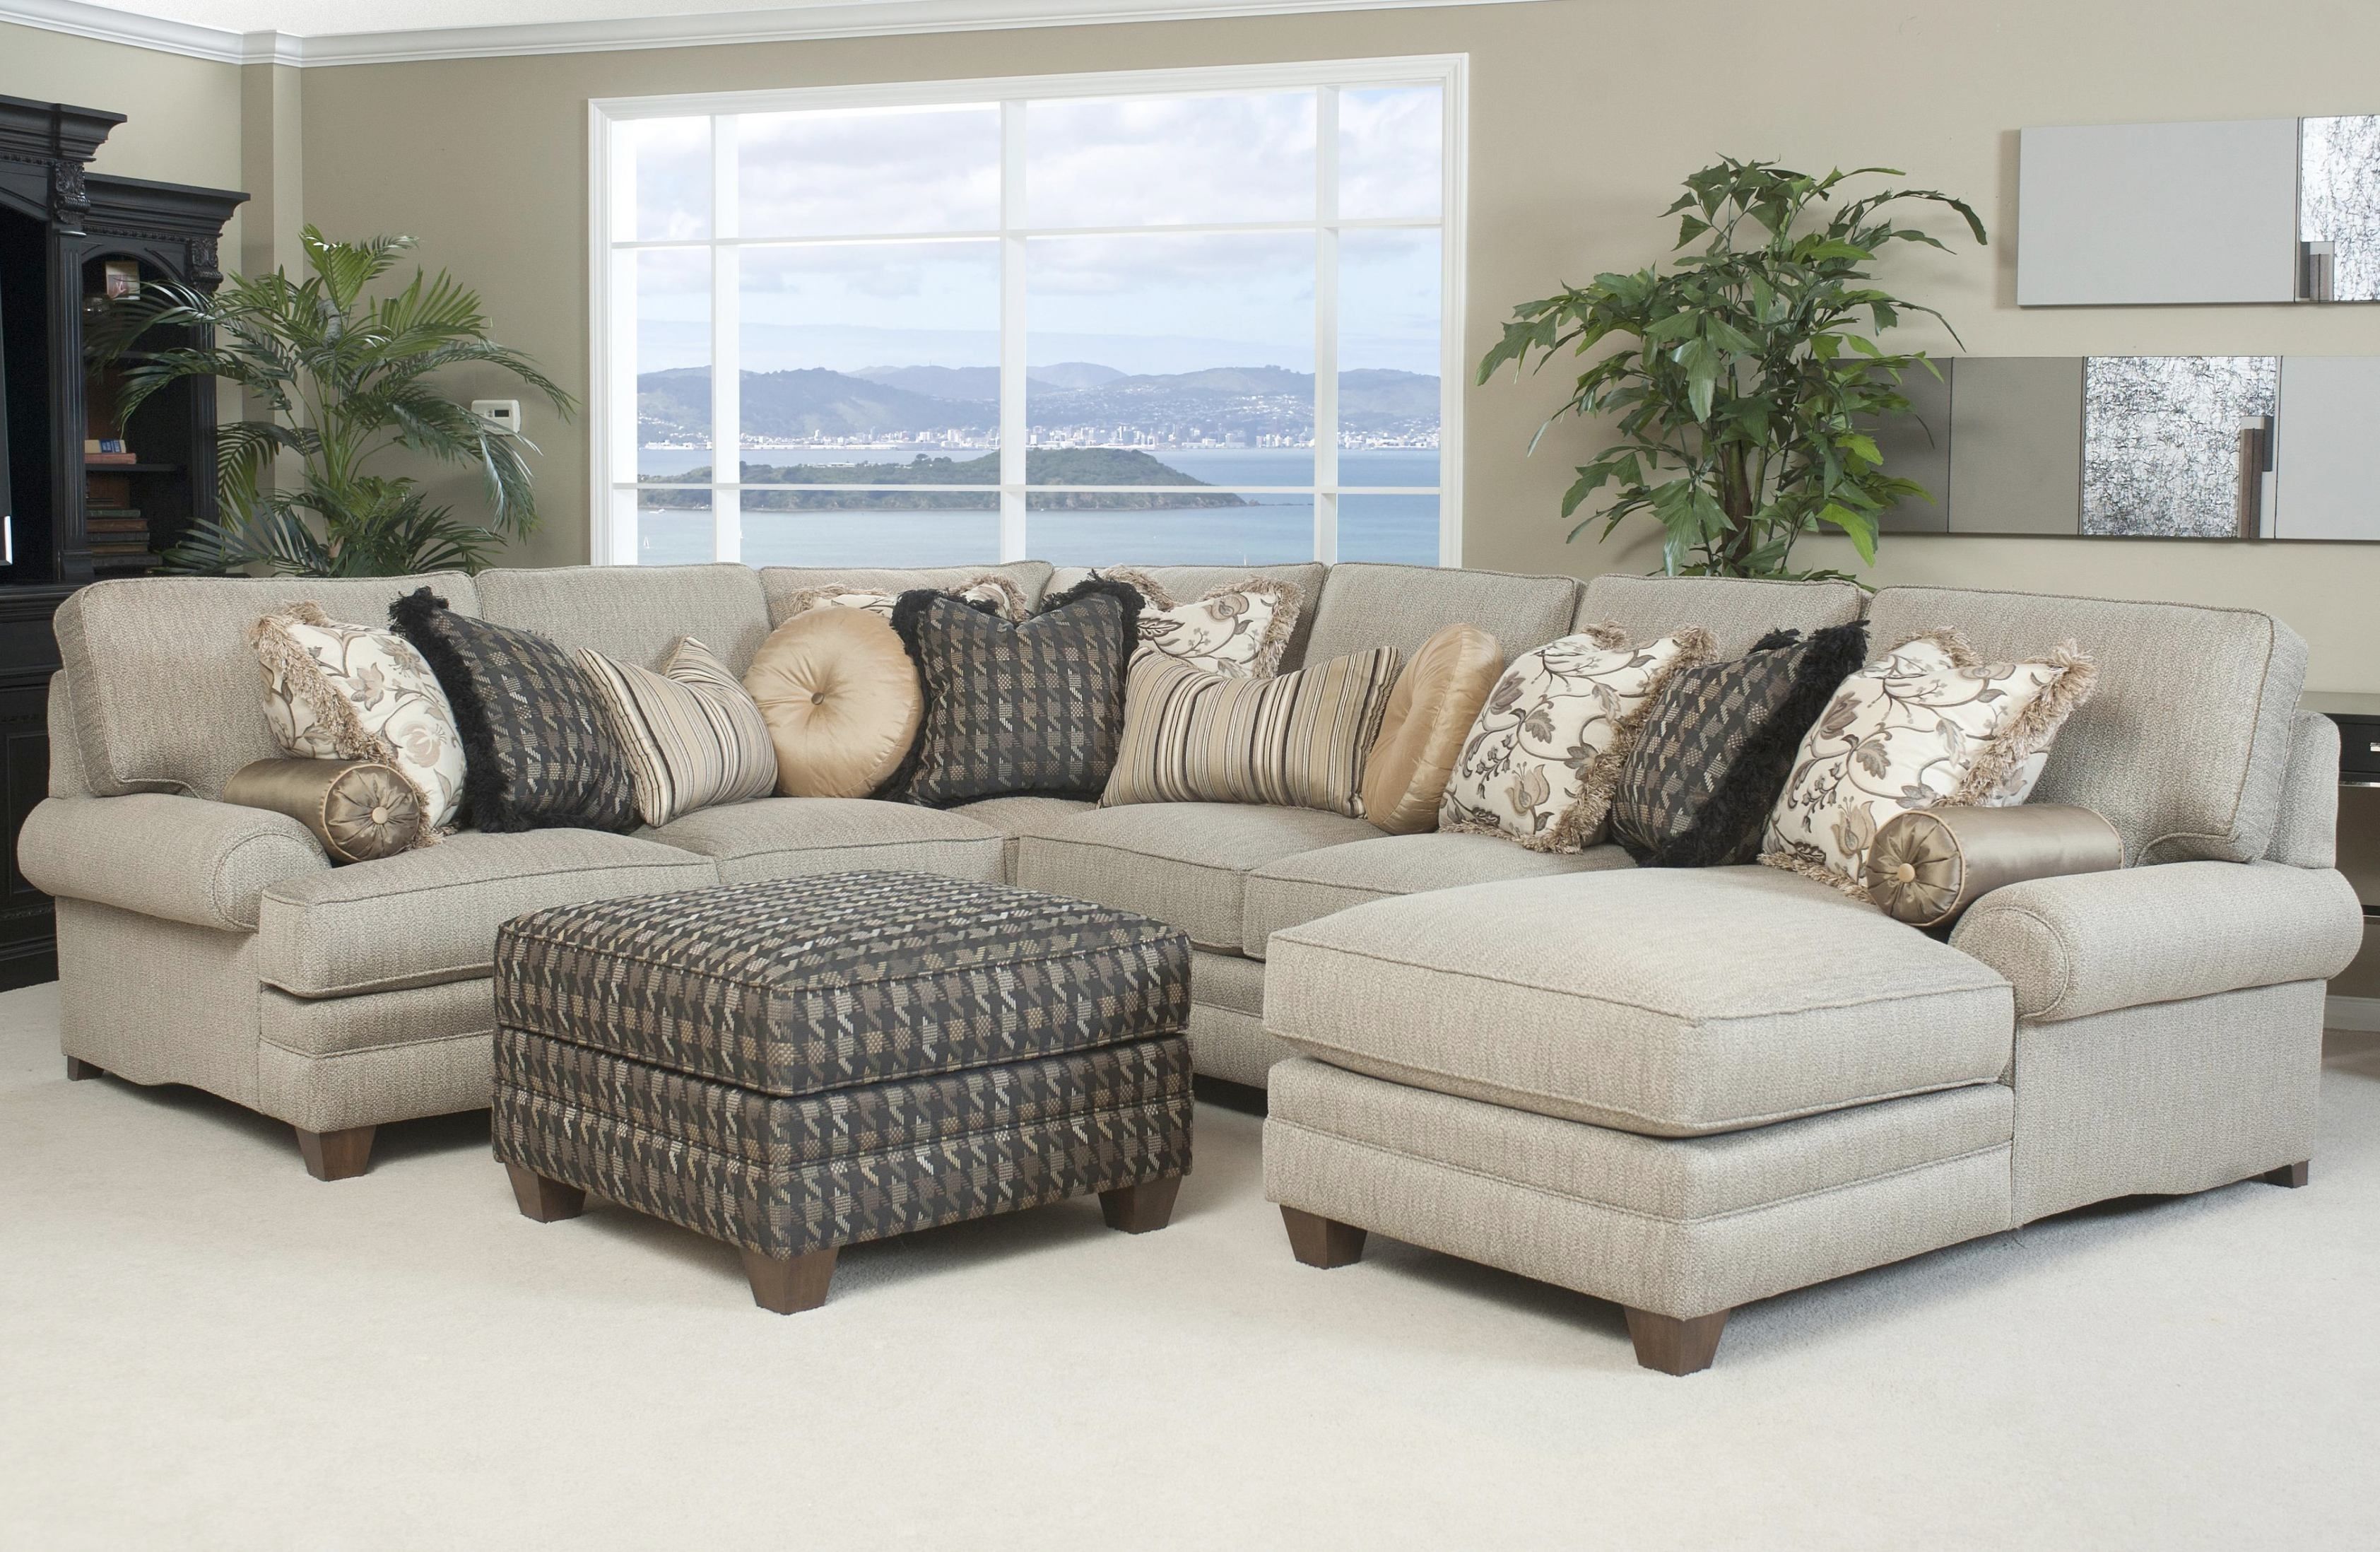 Delightful Most Comfortable Sectional Reviews #1 Inspiring Most Pertaining To Comfortable Sectional Sofas (View 1 of 10)